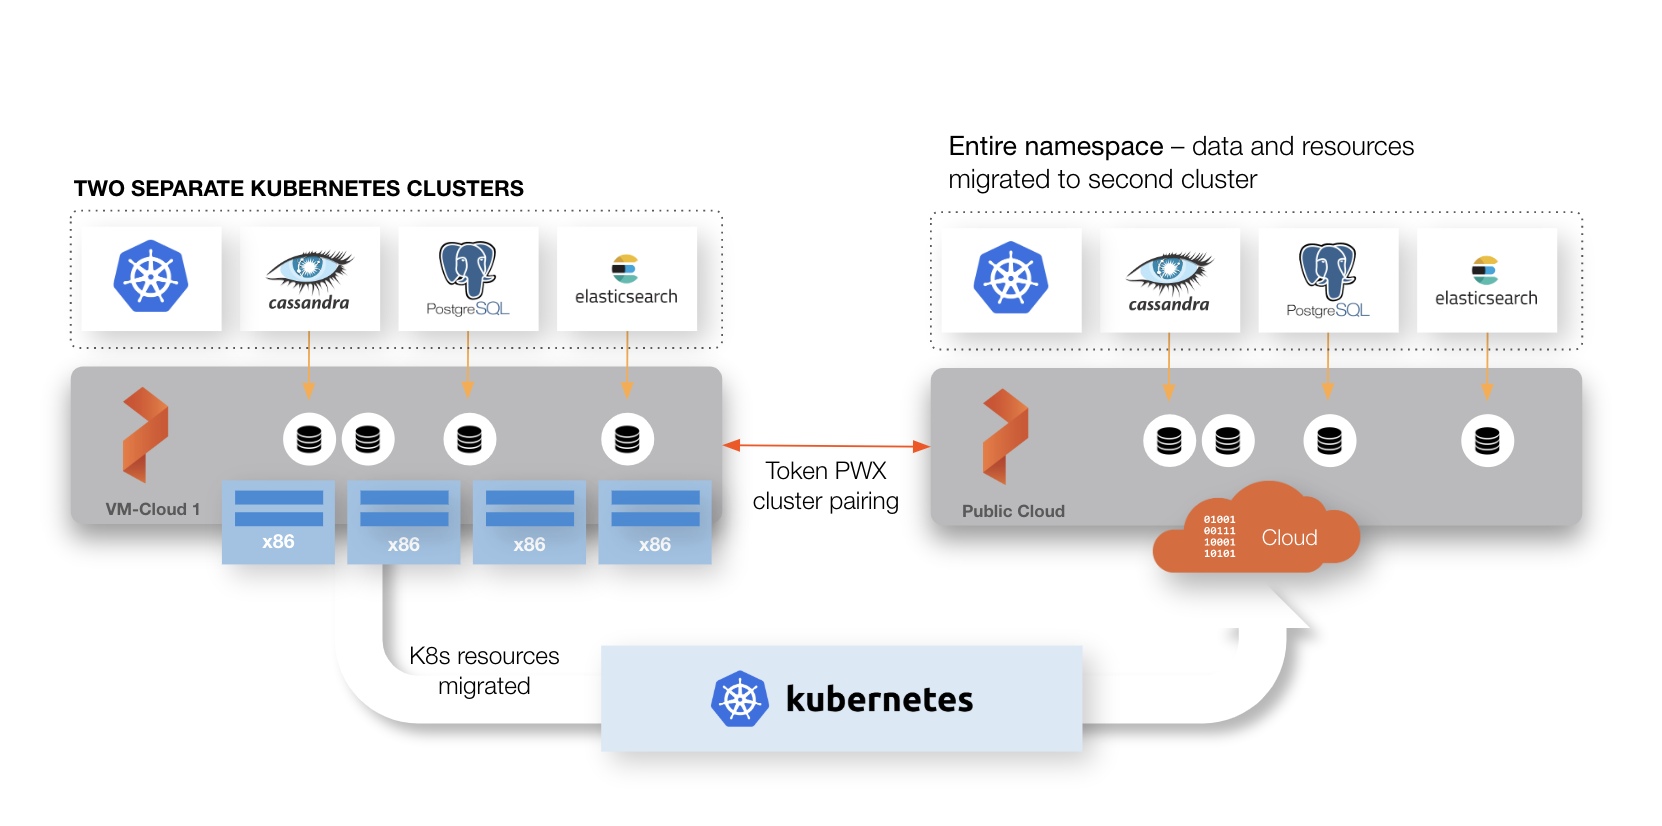 Asynchronous DR of a wide-area network (WAN) using multiple Kubernetes clusters with multiple Portworx clusters